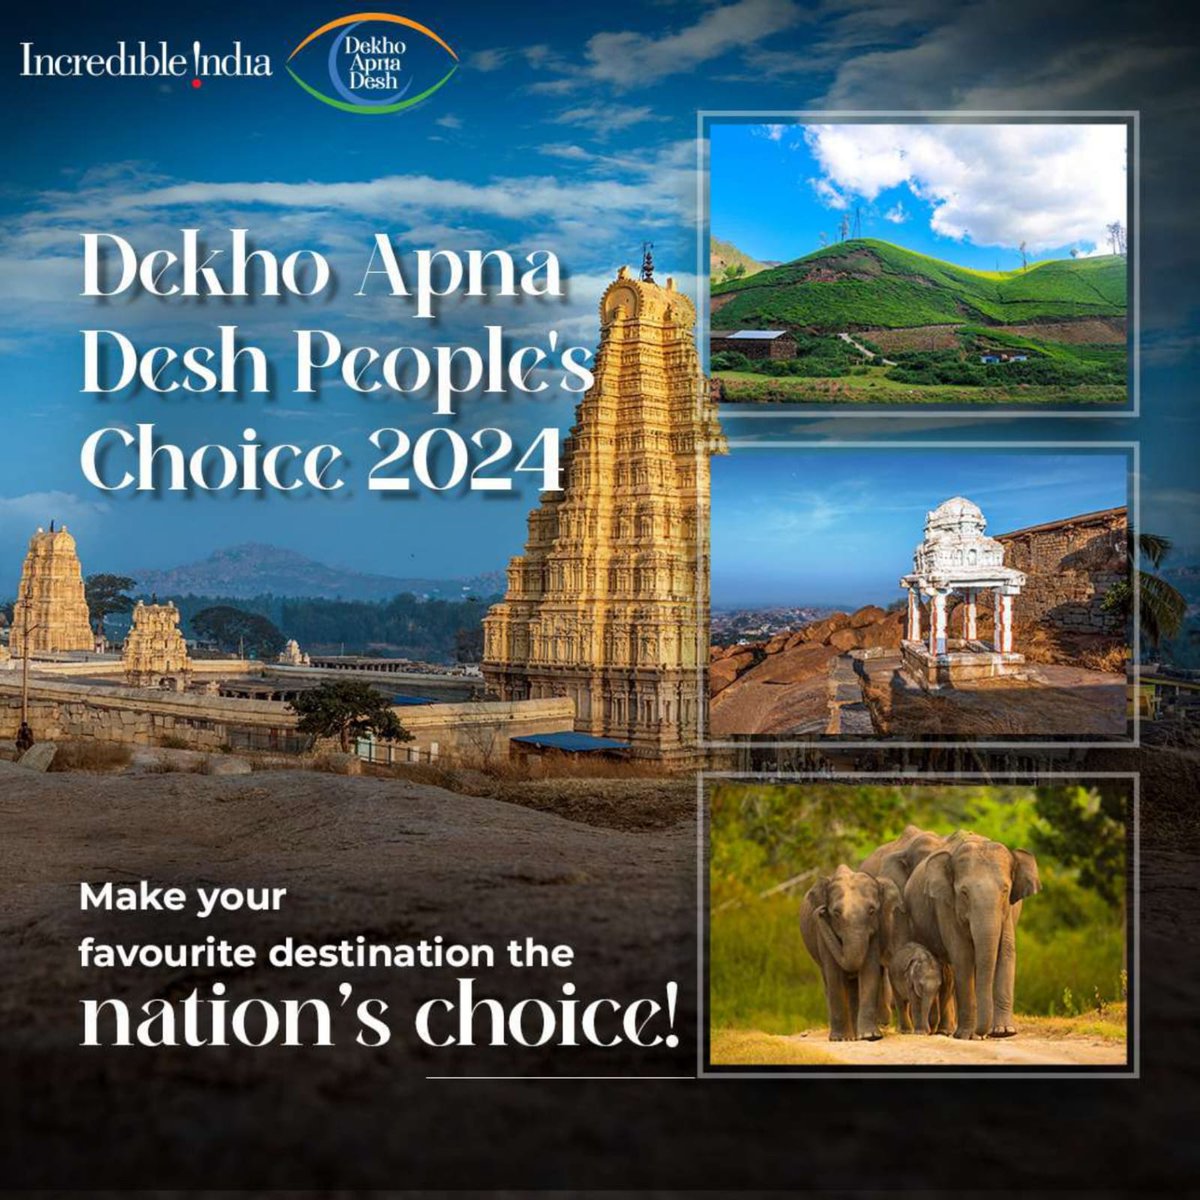 Explore the wonders of @incredibleindia! Hon'ble Prime Minister, Shri @narendramodi, has launched the #DekhoApnaDesh - People's Choice 2024 to seek public responses on most favourite tourist attractions across the country. Choose your favourite tourist attractions across